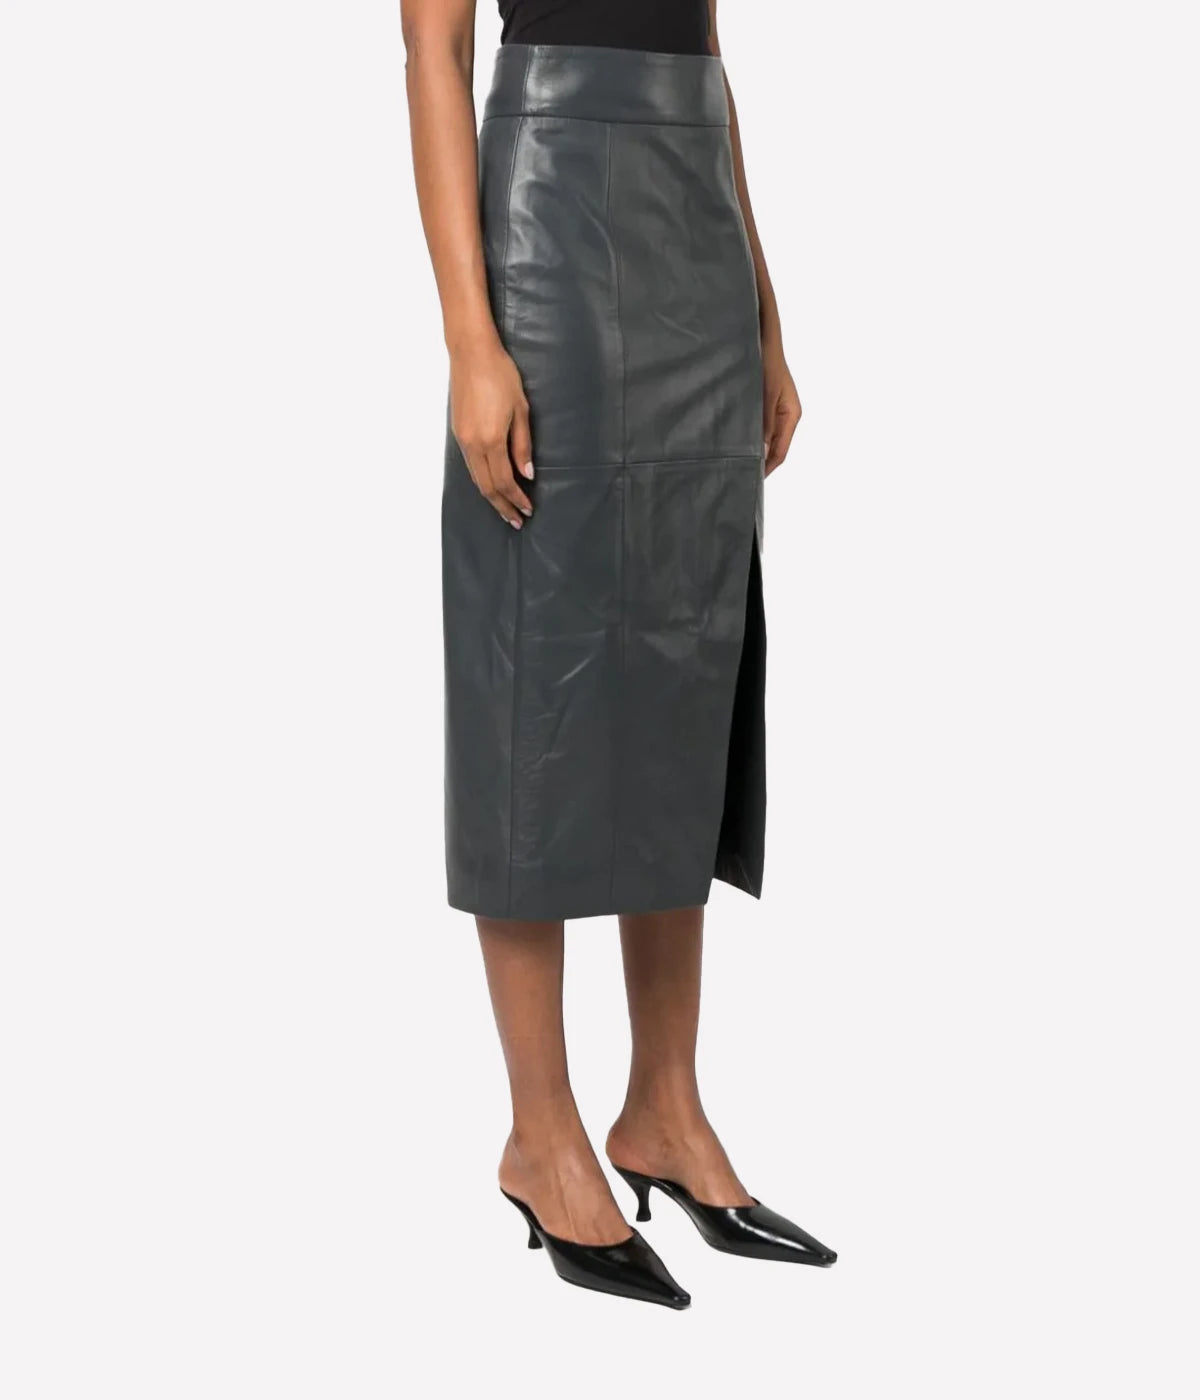 Maglia Skirt in Anthracite Grey